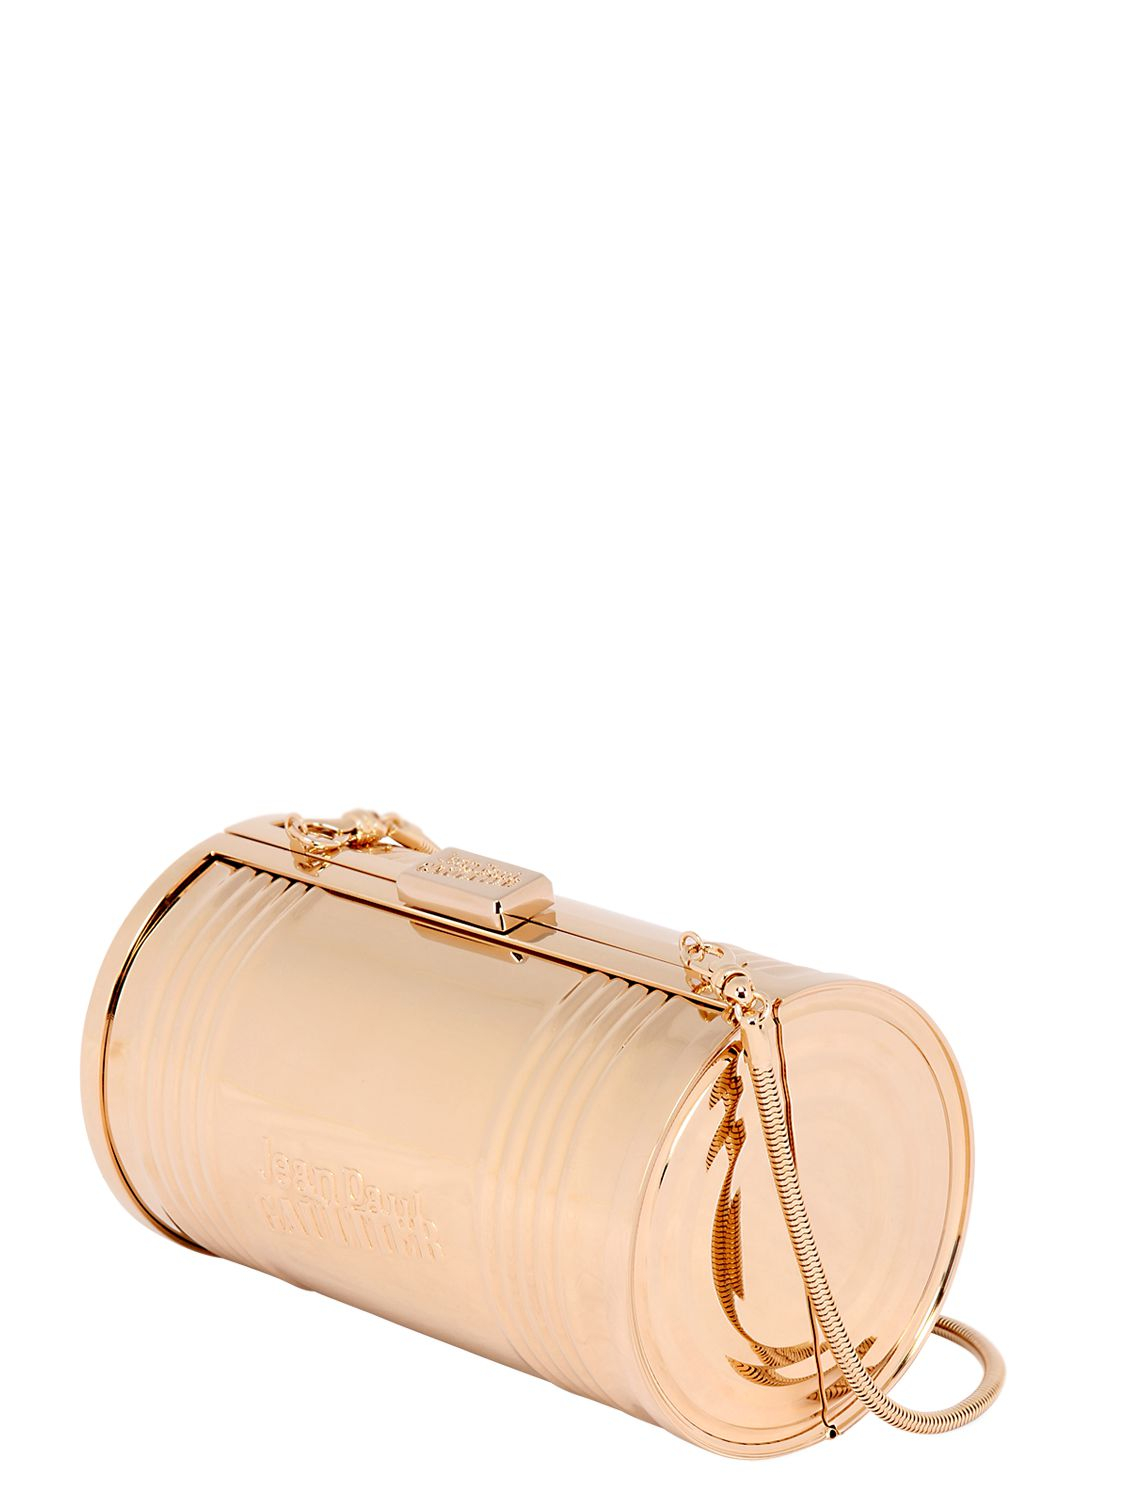 Jean Paul Gaultier Rose Gold Plated Can Clutch in Metallic - Lyst